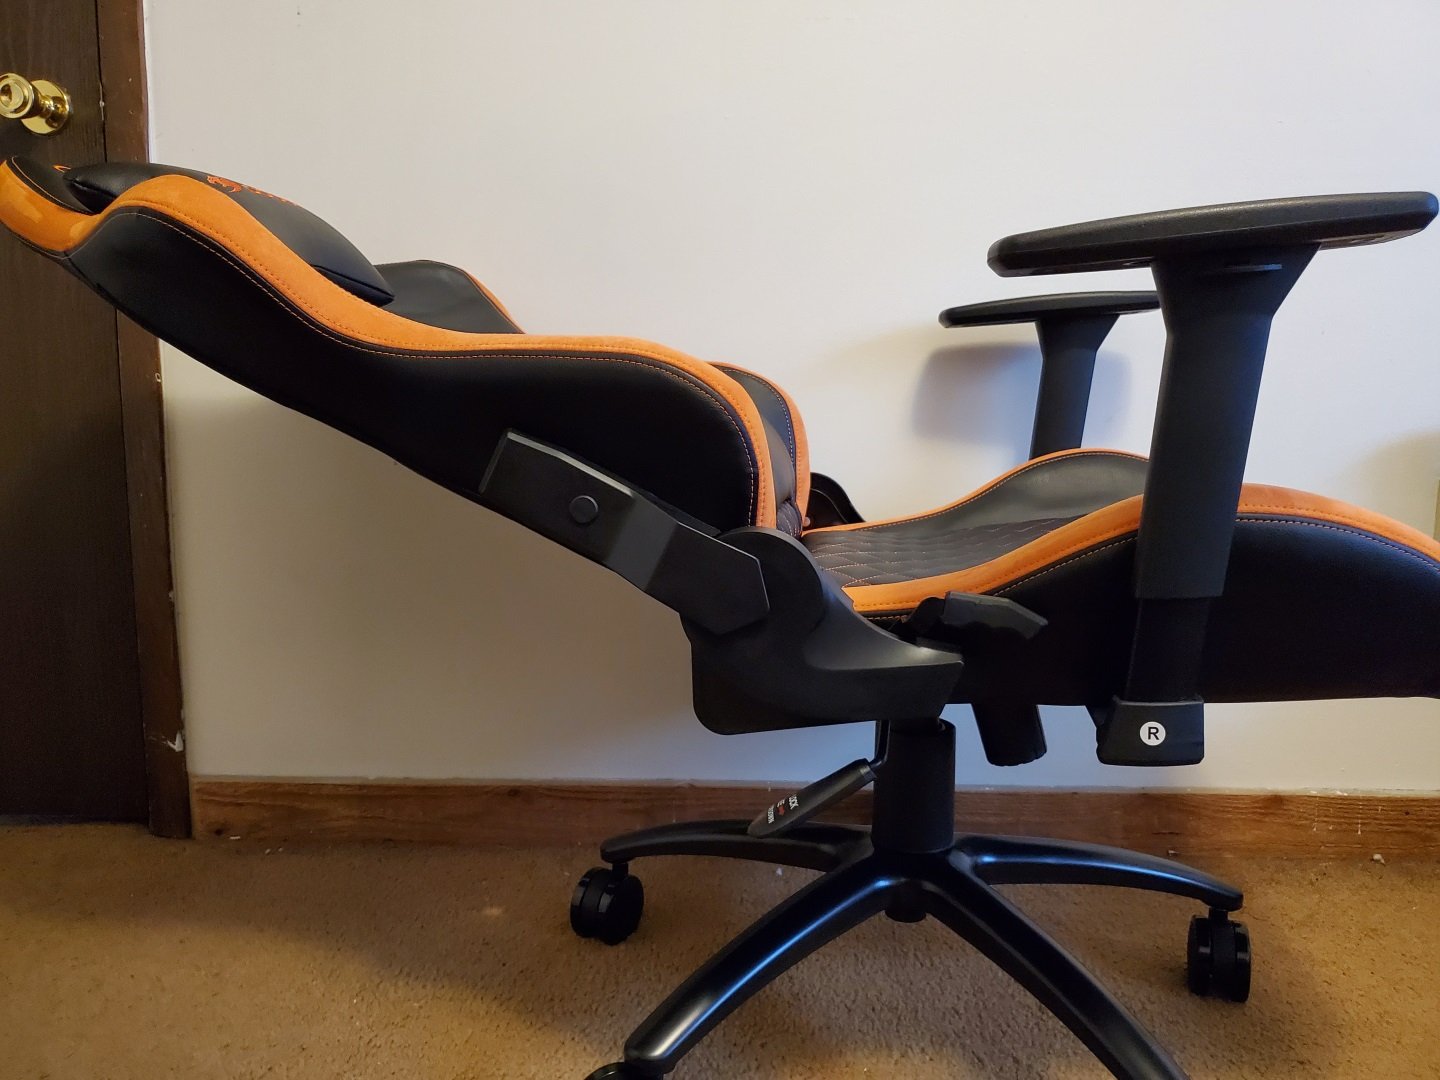 Cougar Armor Gaming Chair Review - Final Thoughts and Conclusion - Dragon  Blogger Technology